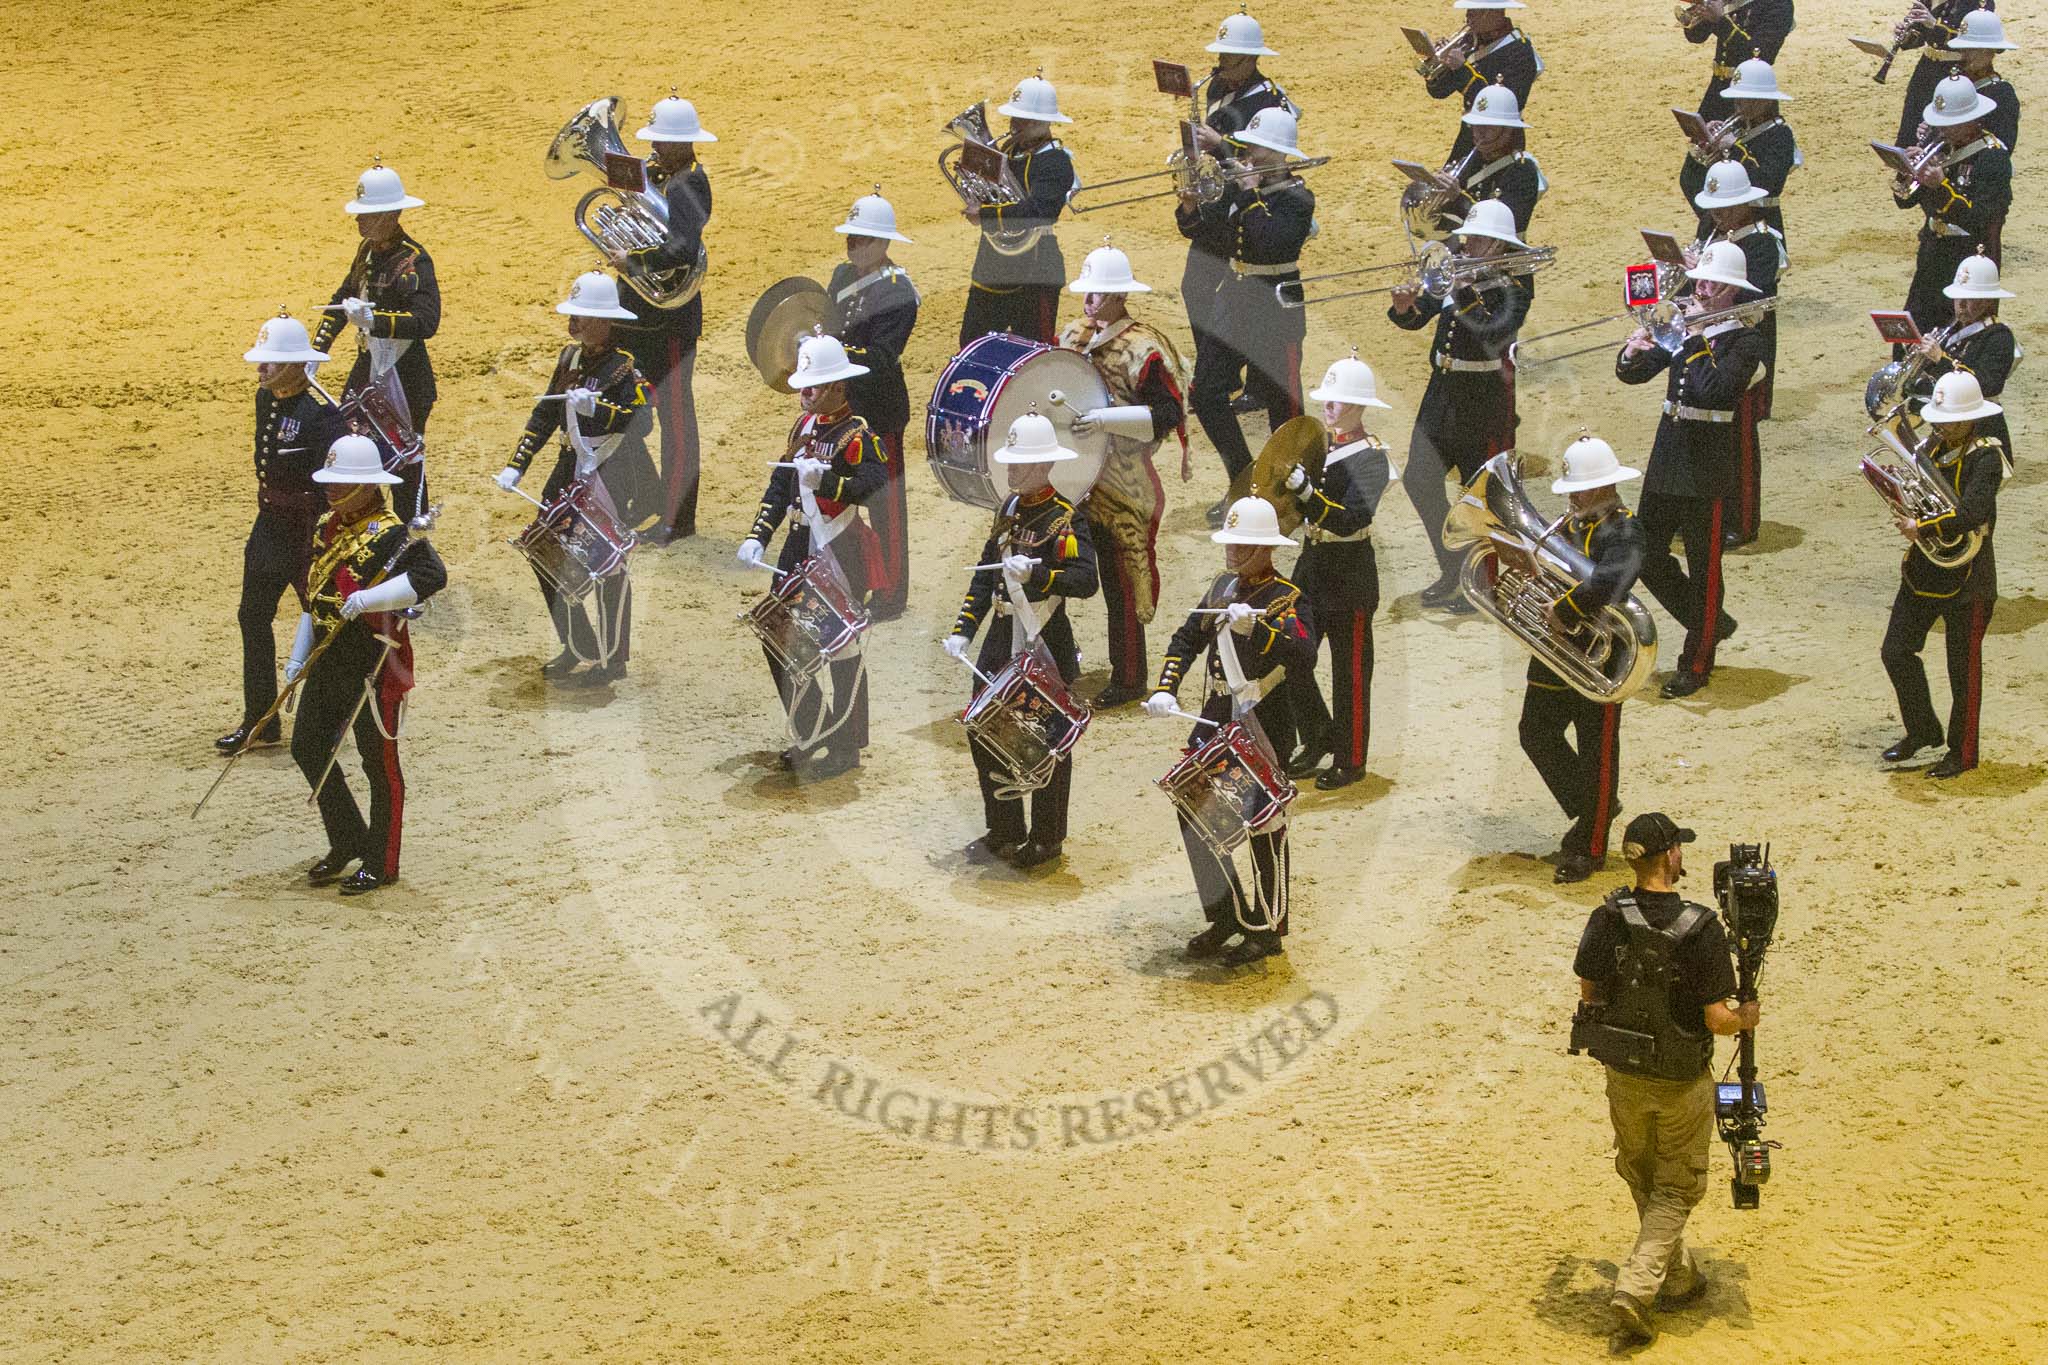 British Military Tournament 2013.
Earls Court,
London SW5,

United Kingdom,
on 06 December 2013 at 16:16, image #352